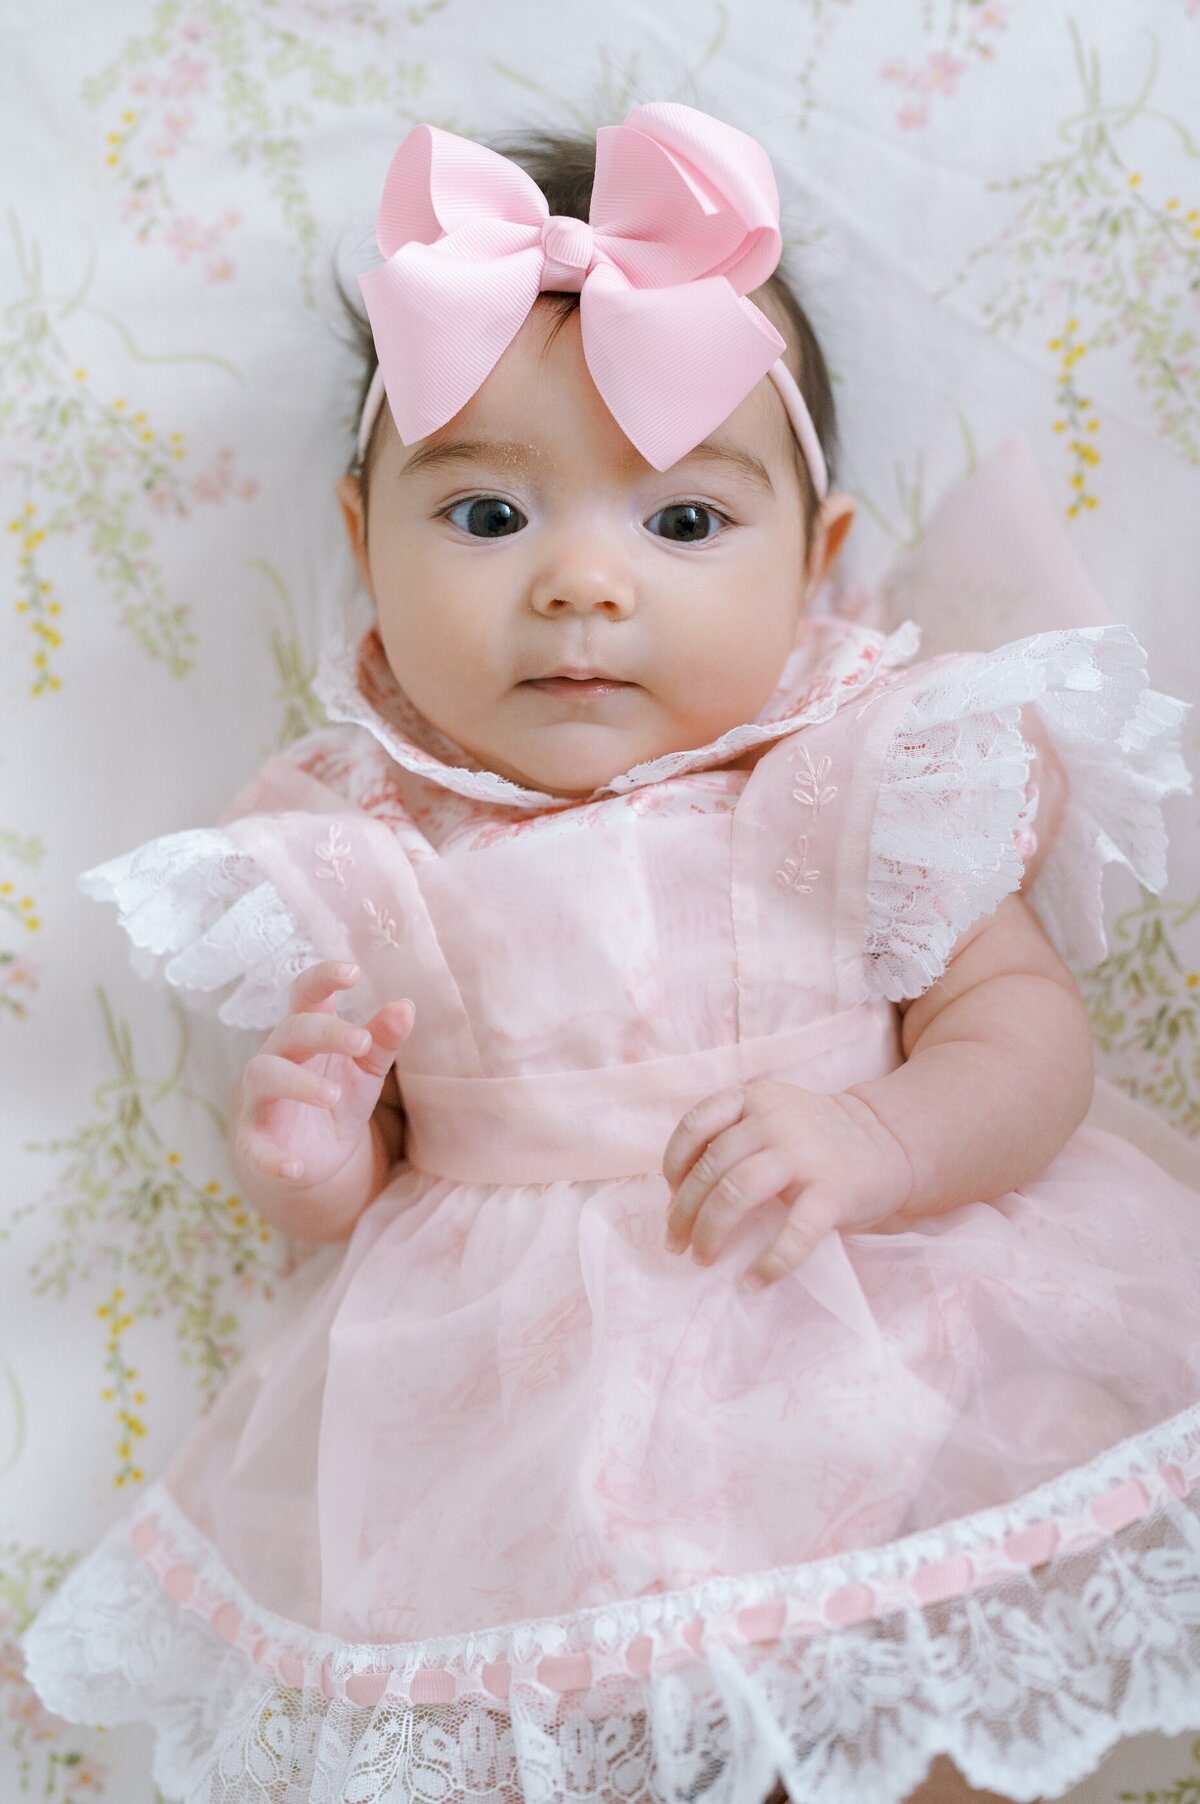 Newborn girl wtih eyes wide open wearing a lacy pink chiffon dress and laying on a floral blanket..